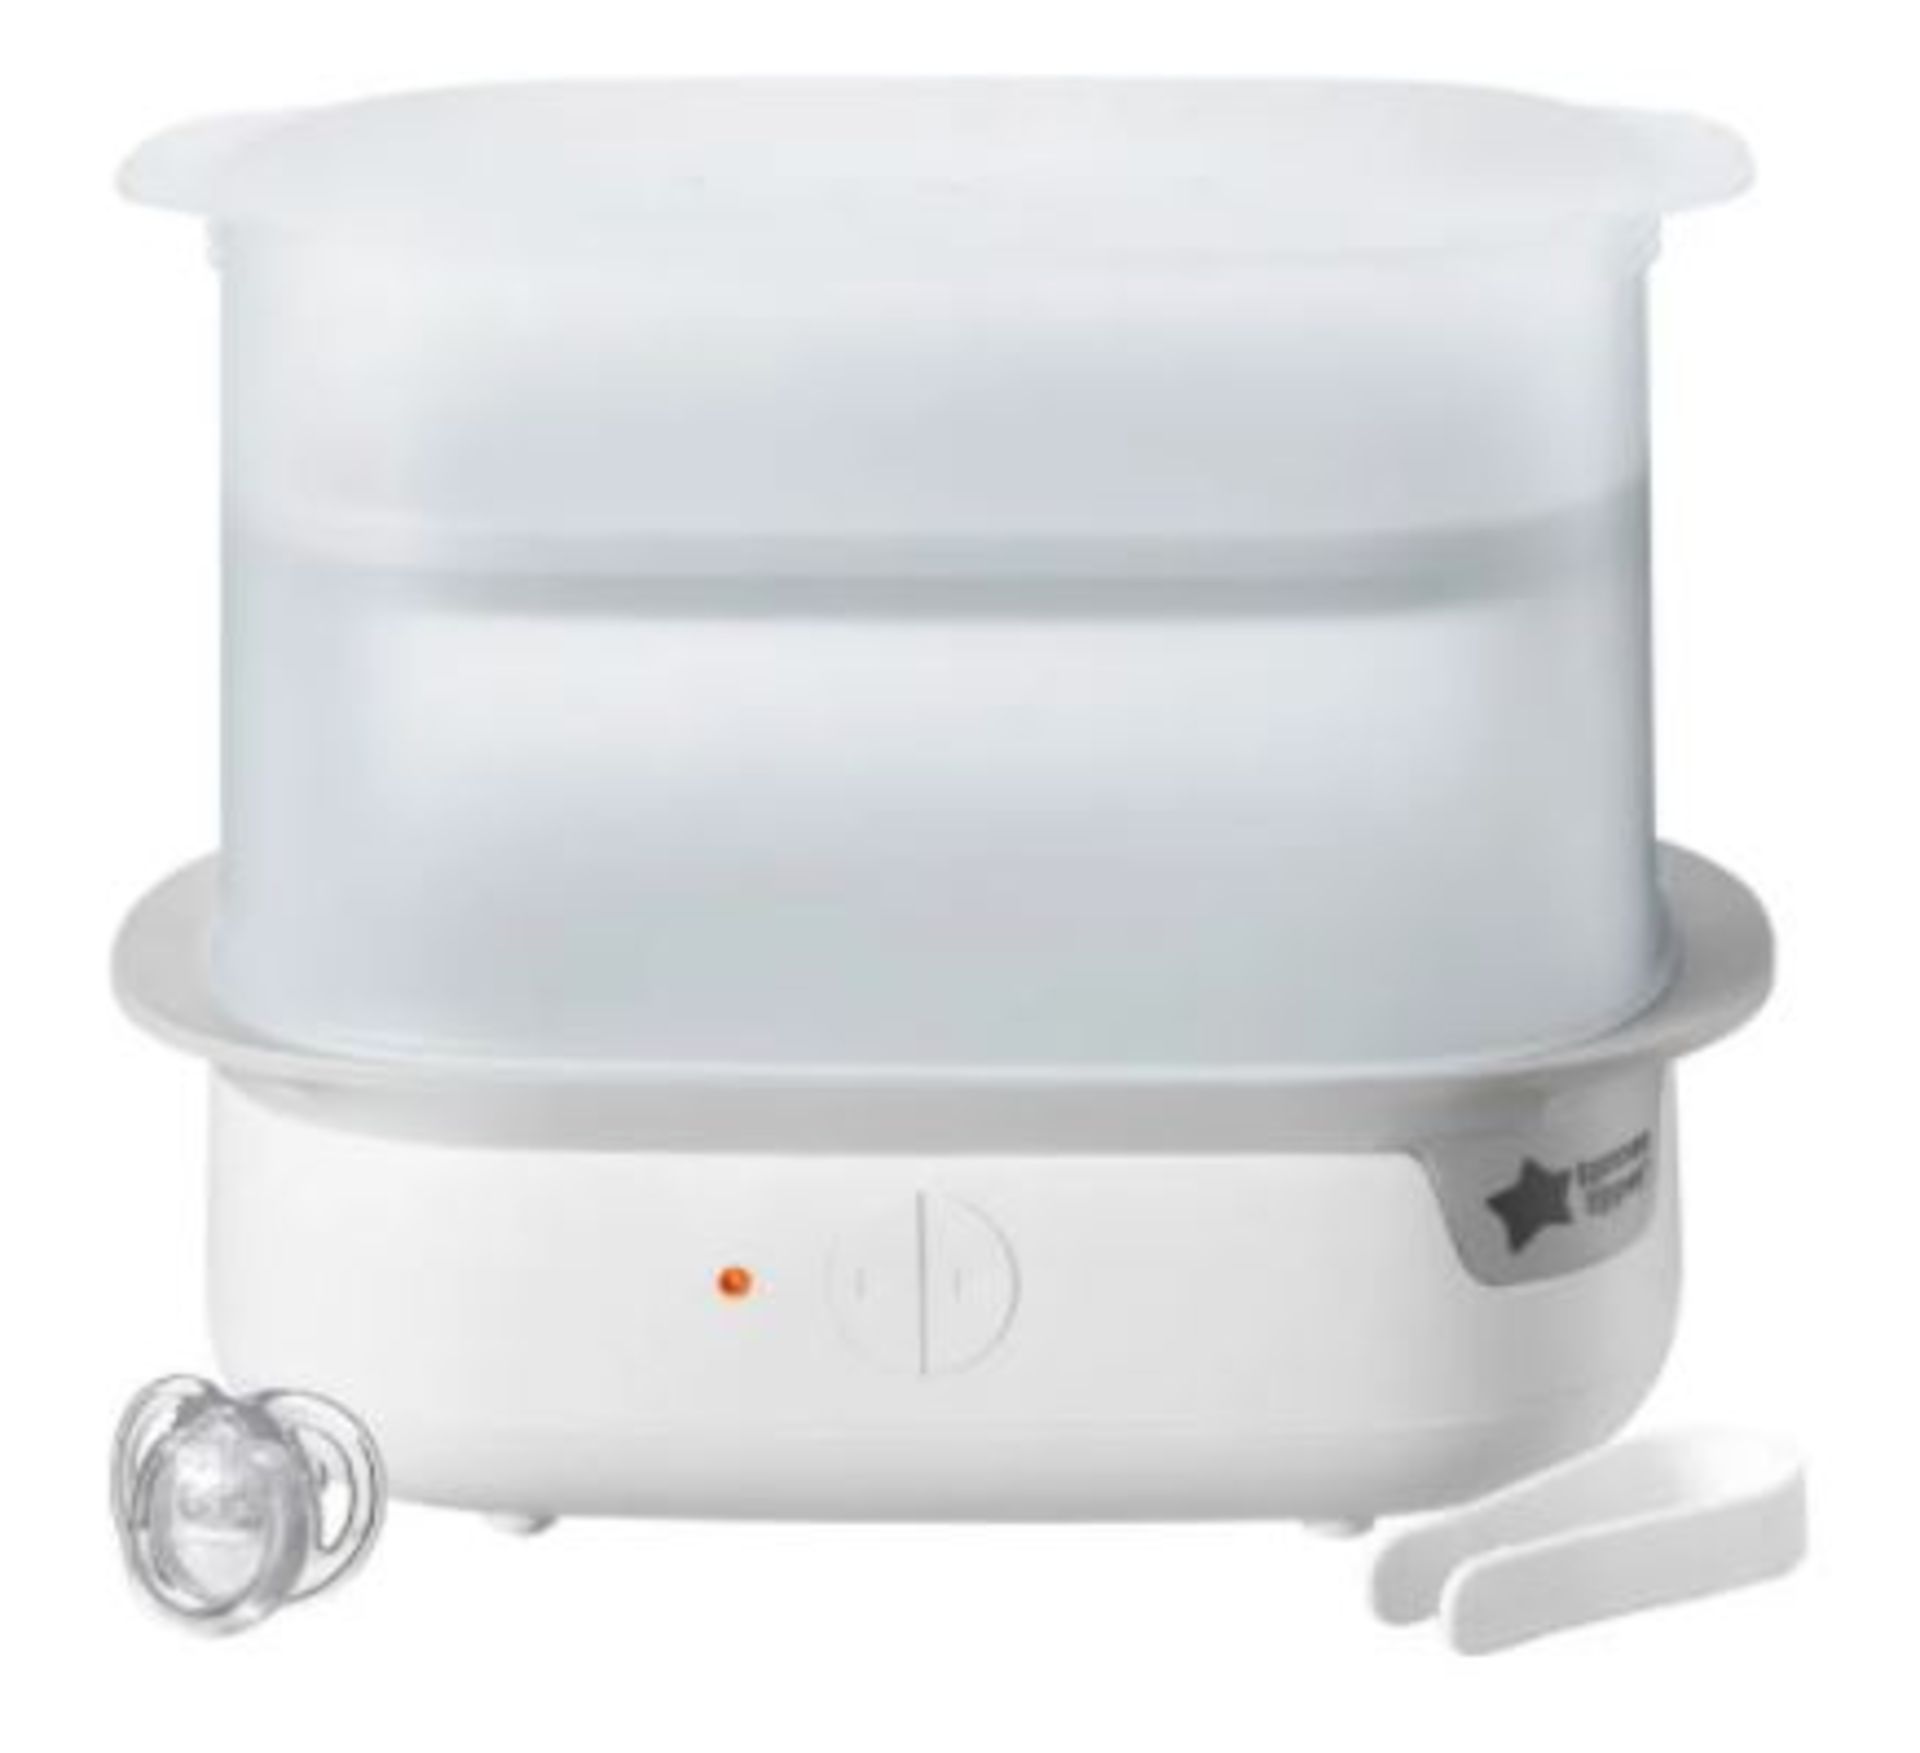 (R6D) Baby. 1 X Tommee Tippee Super Steam Advanced Electric Steriliser. RRP £69.99 (New)